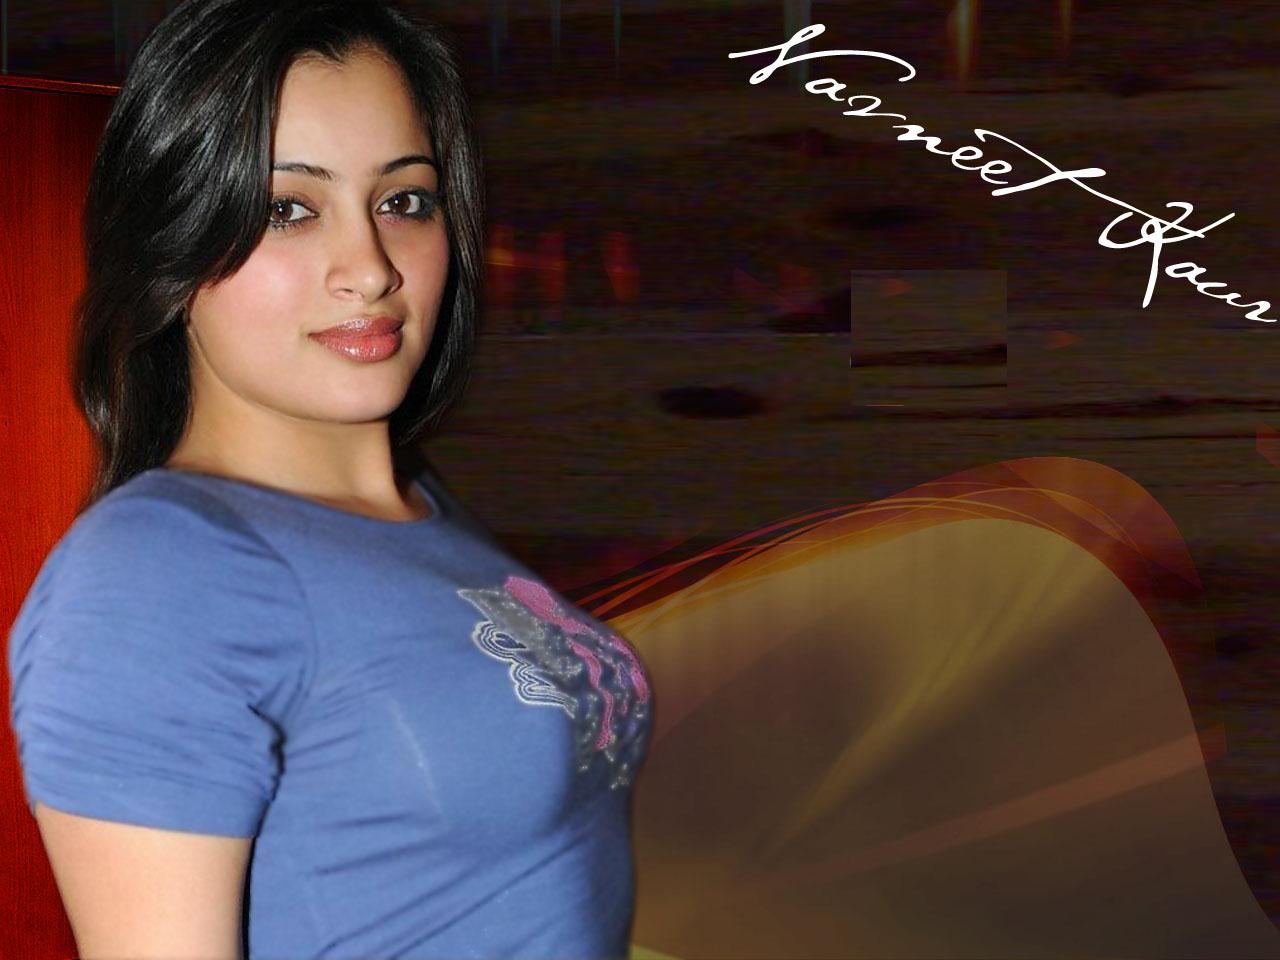 Tamil Actress Hot Hd Wallpapers For Mobile Tons Of Awesome Tamil